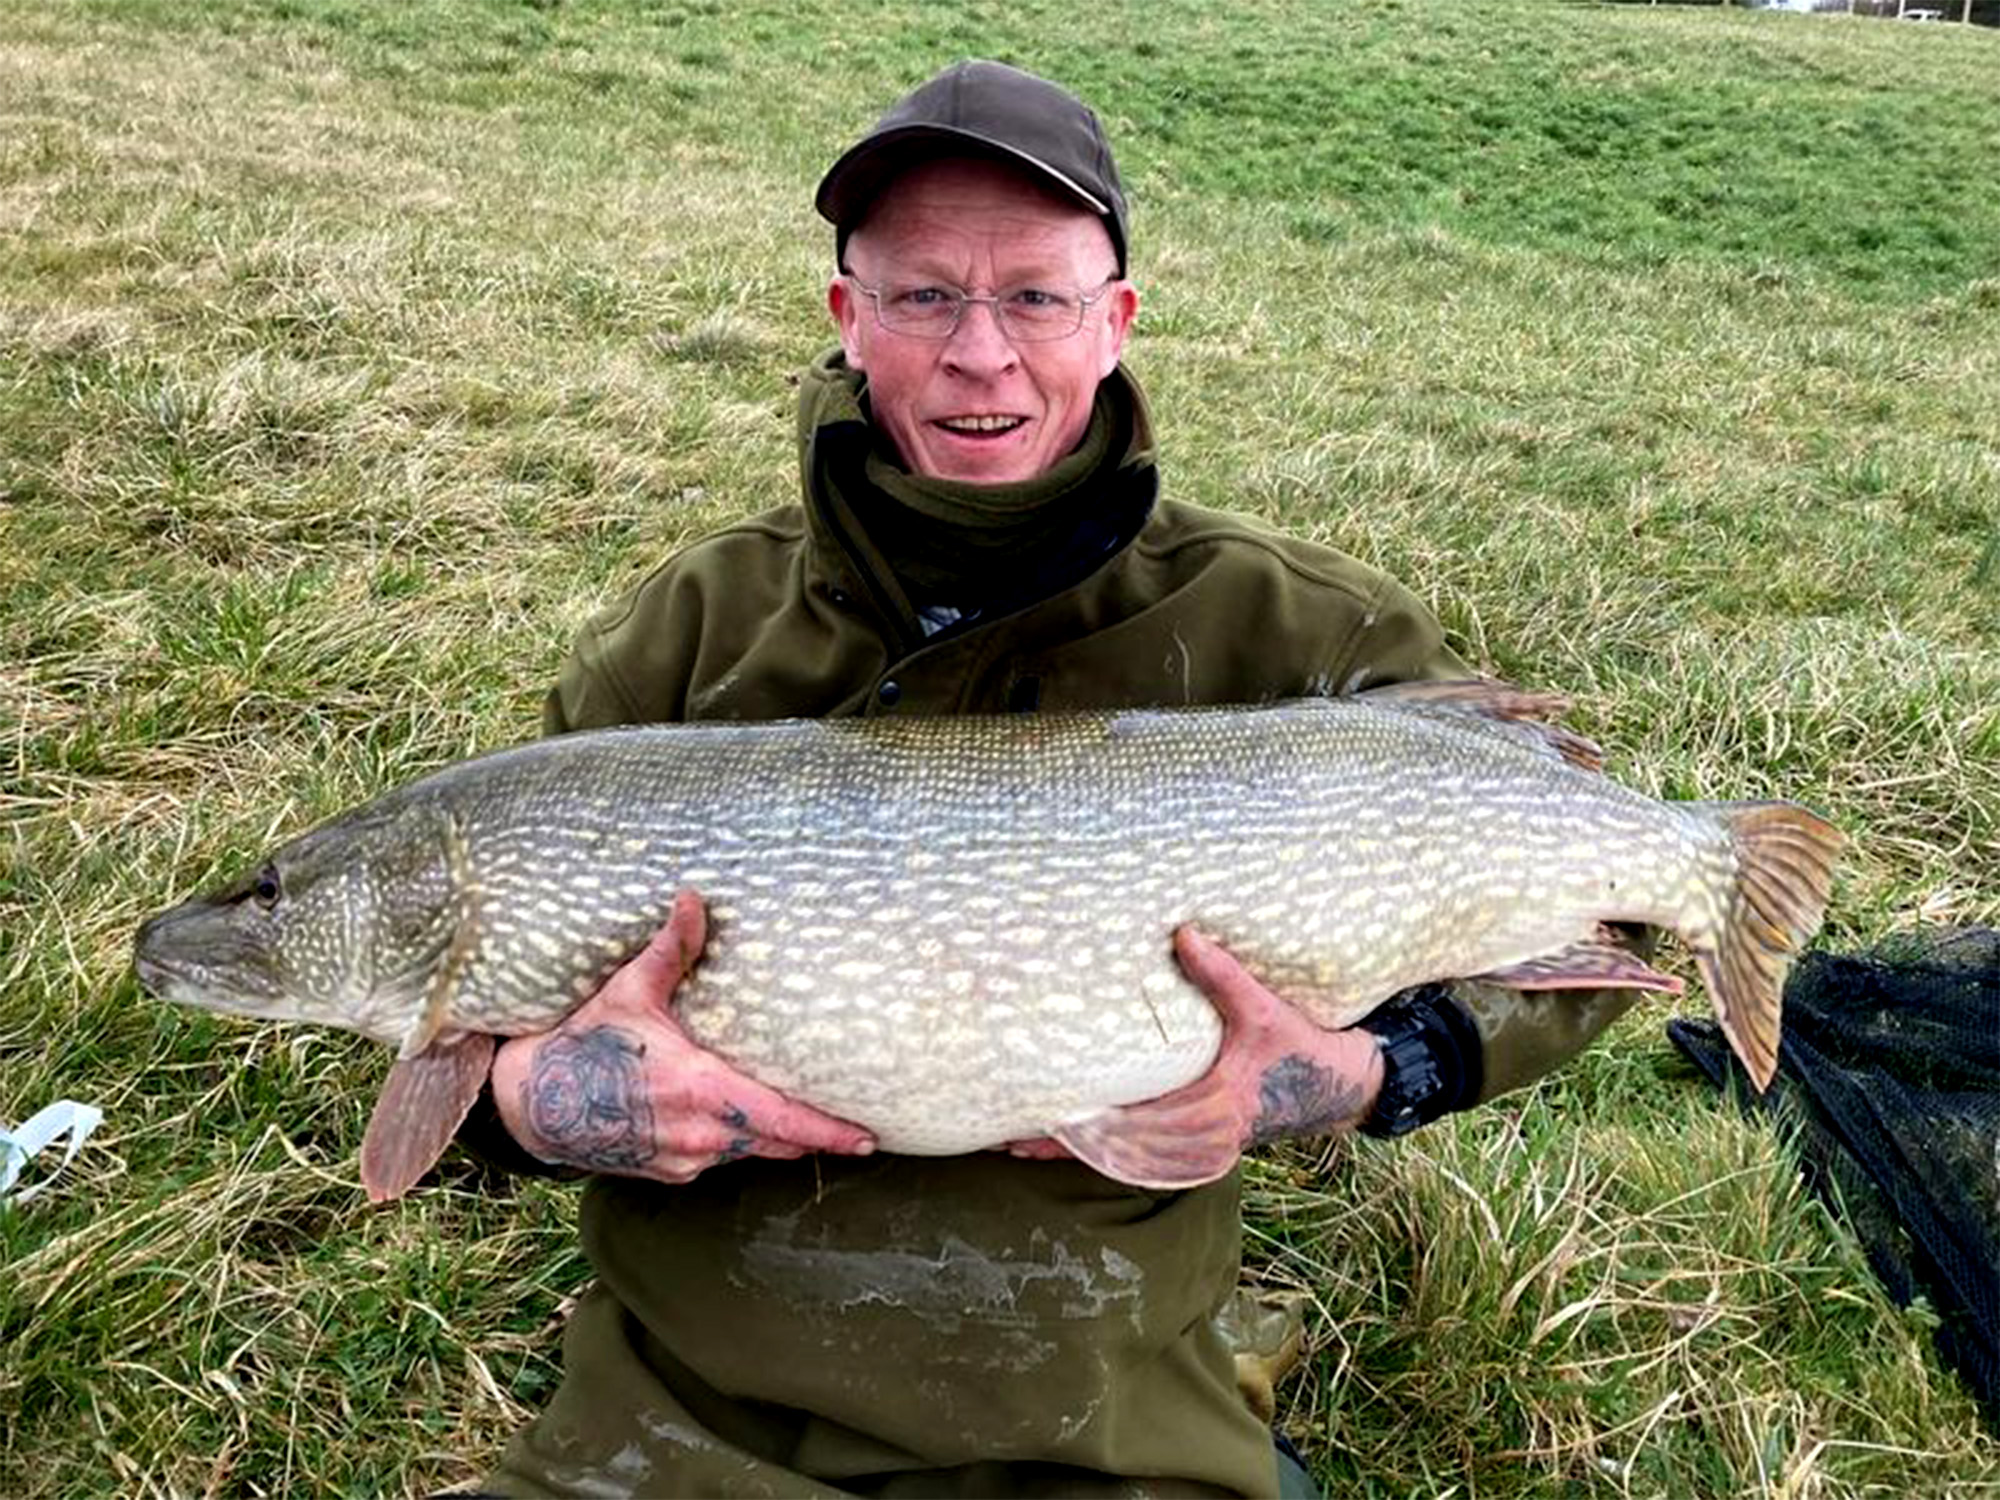 Giant, Record-Sized Pike Caught in England